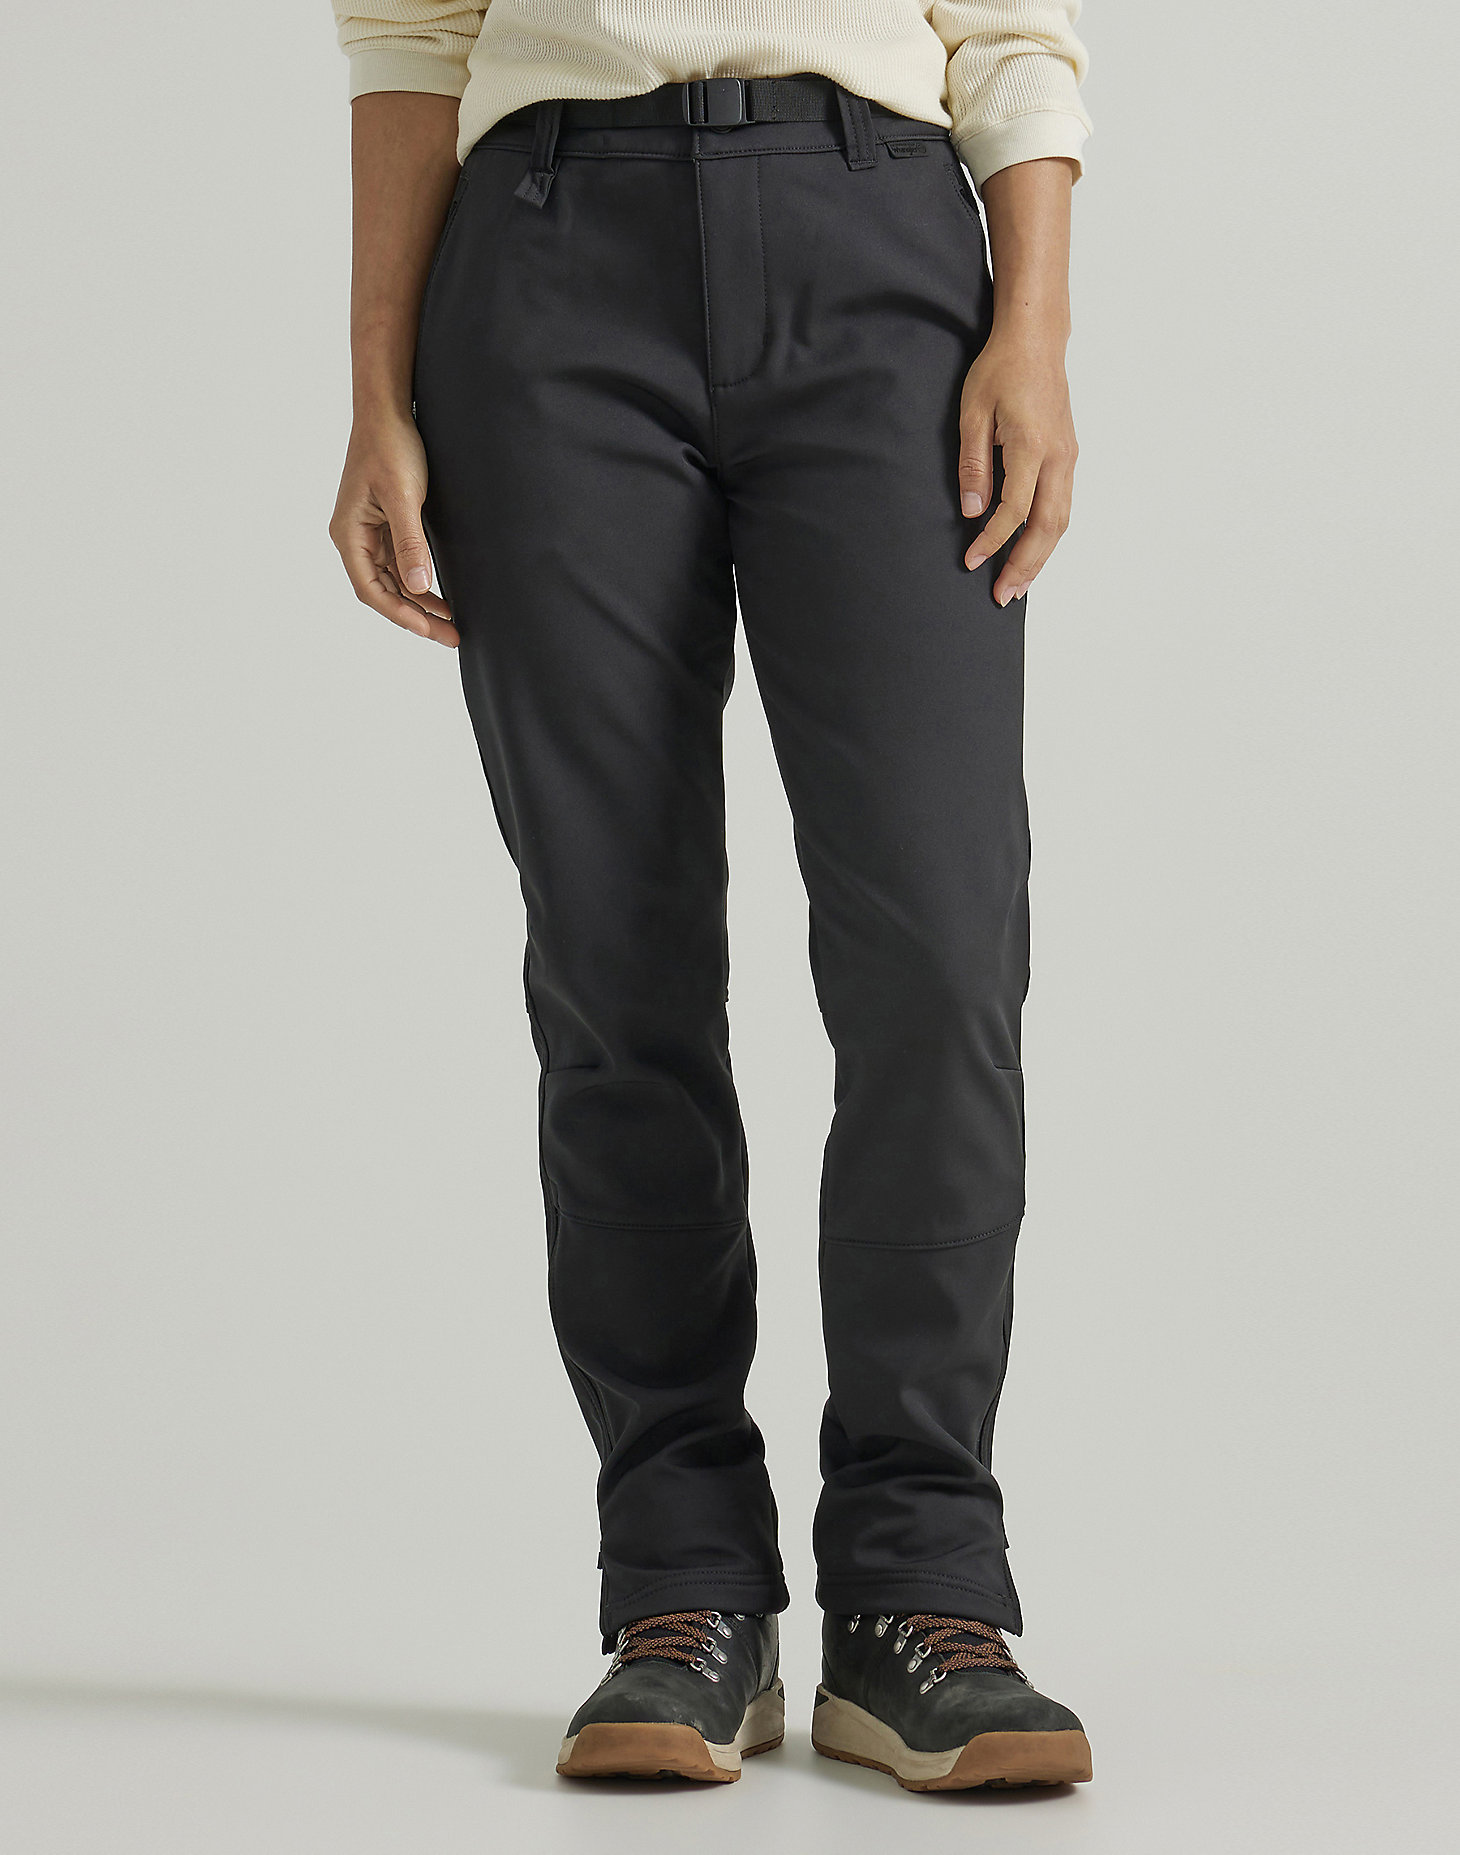 Softshell Pant in Jet Black main view